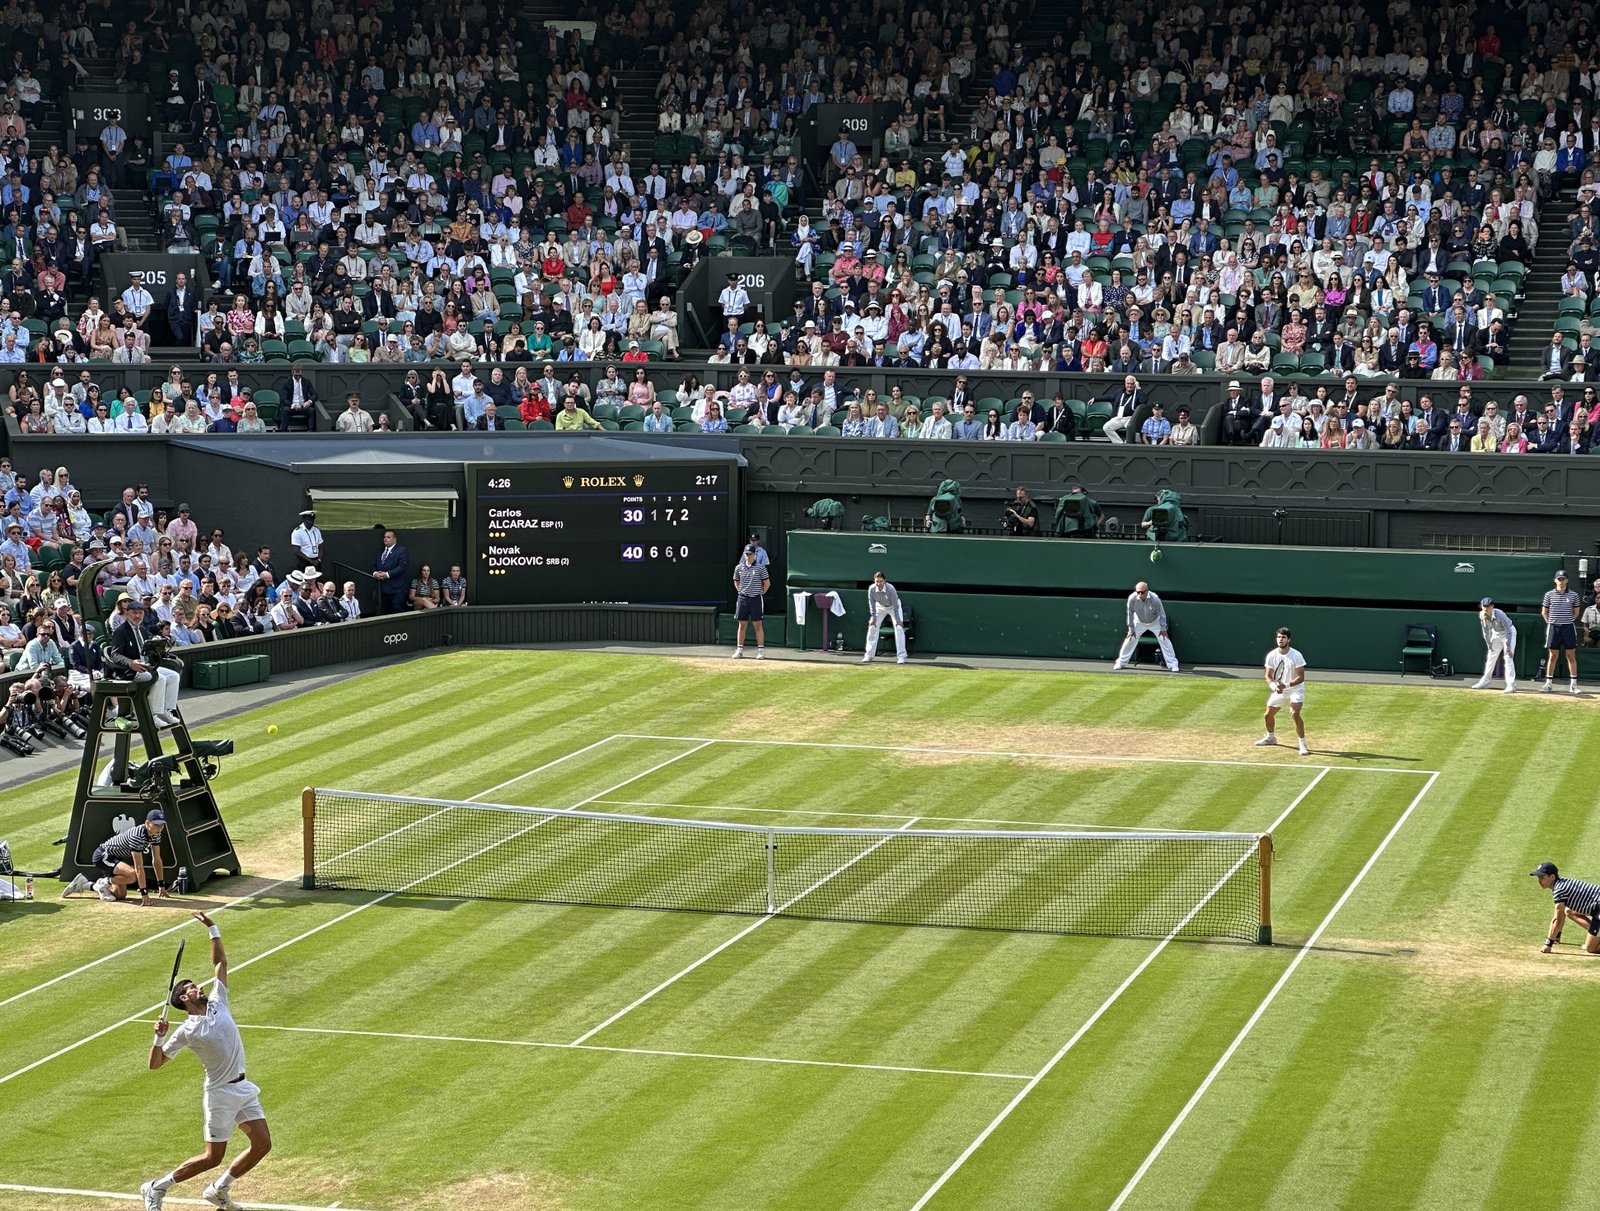 Singles Court Etiquette: Fair Play and Respect for Your Opponent